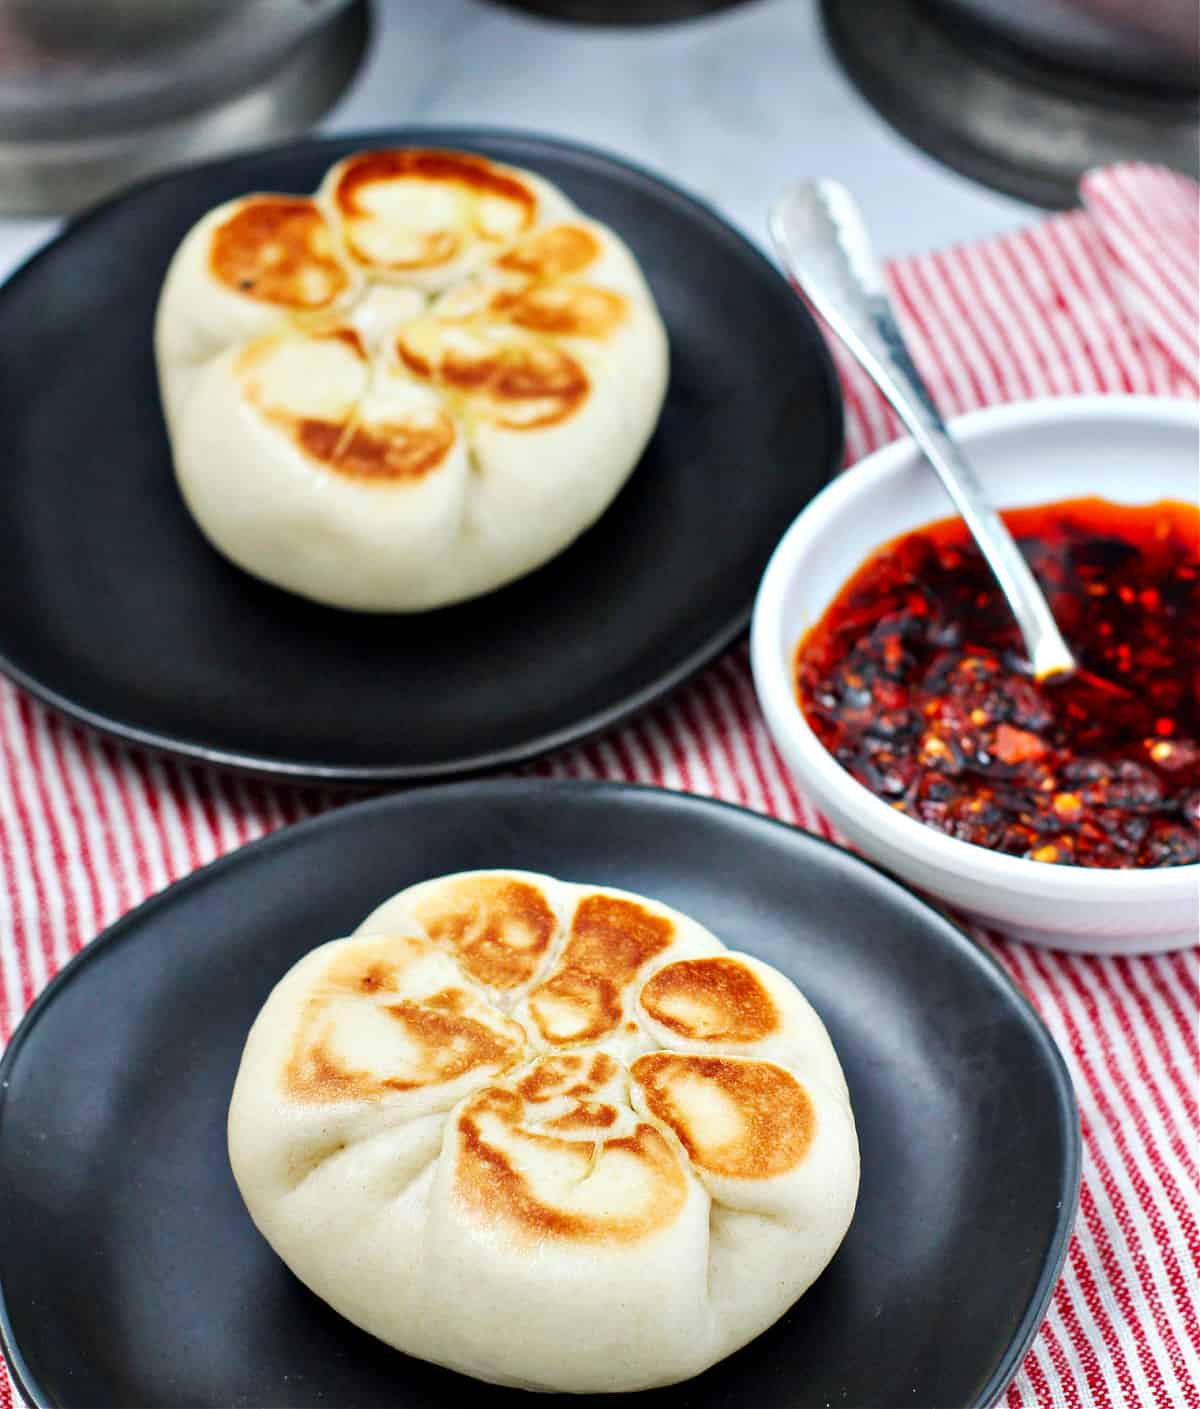 Steamed Chicken and Vegetable Buns on black plates.